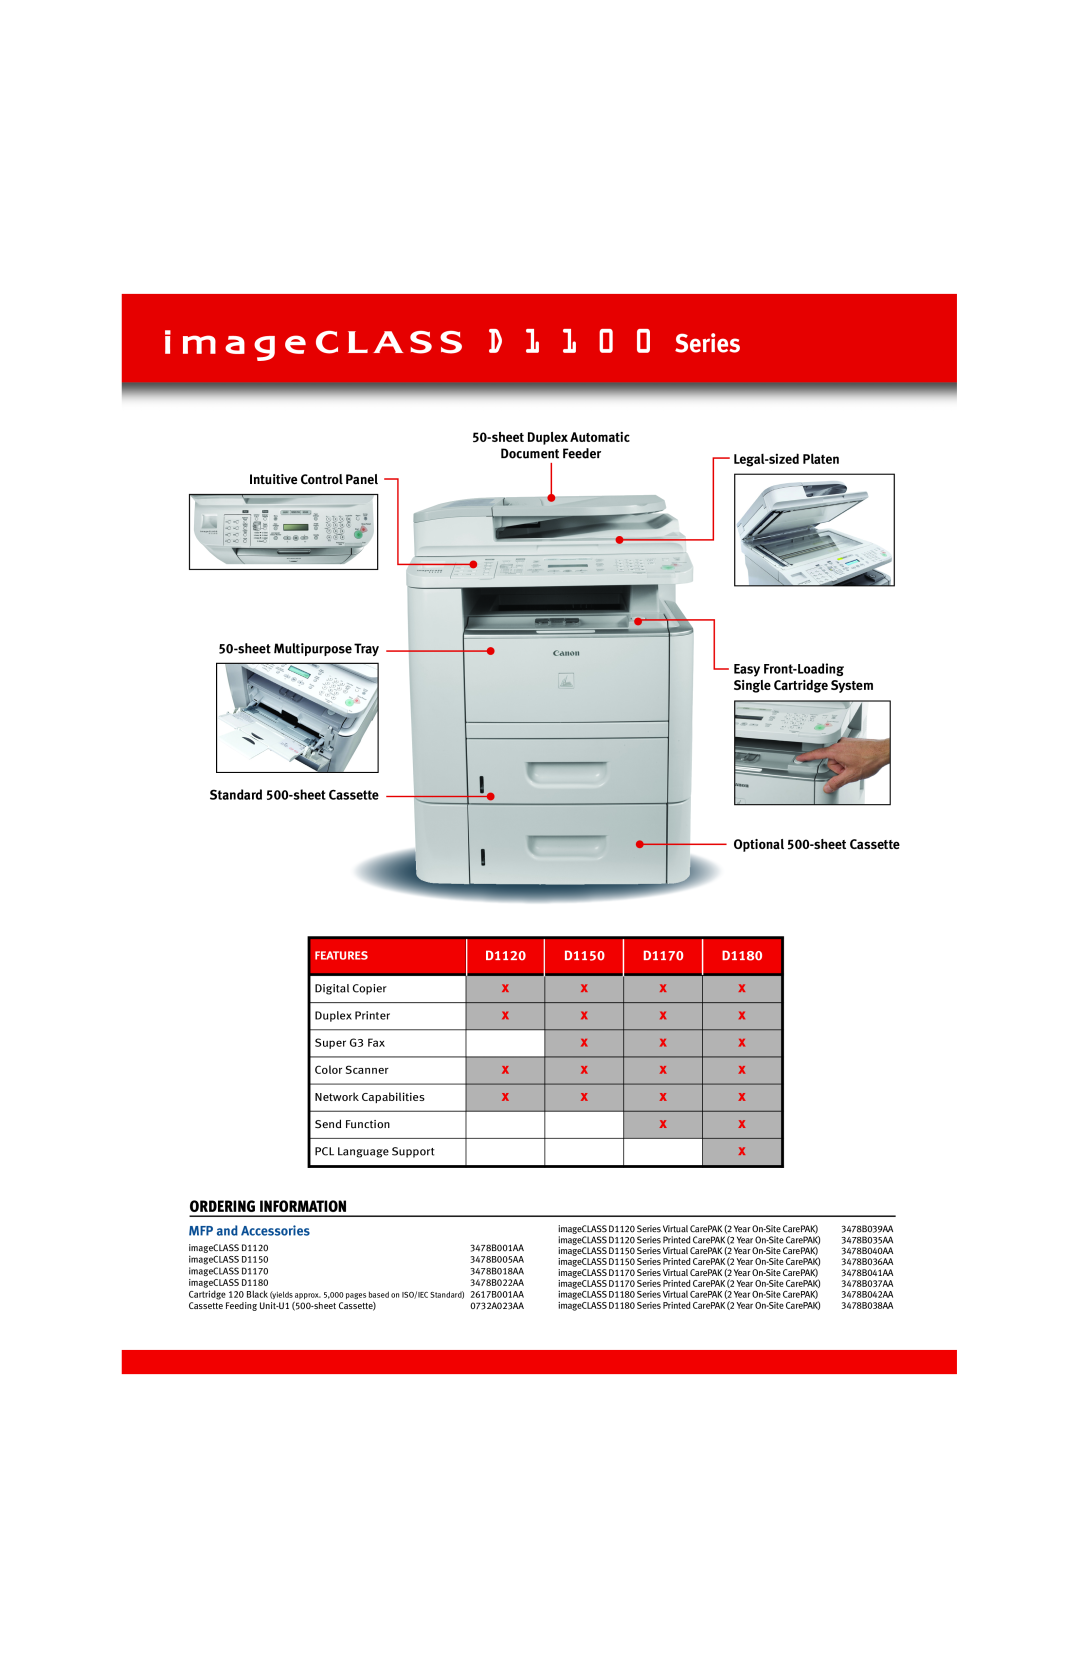 Canon D1150 Series, Ordering Information, Intuitive Control Panel 50-sheet Multipurpose Tray Easy Front-Loading, D1120 